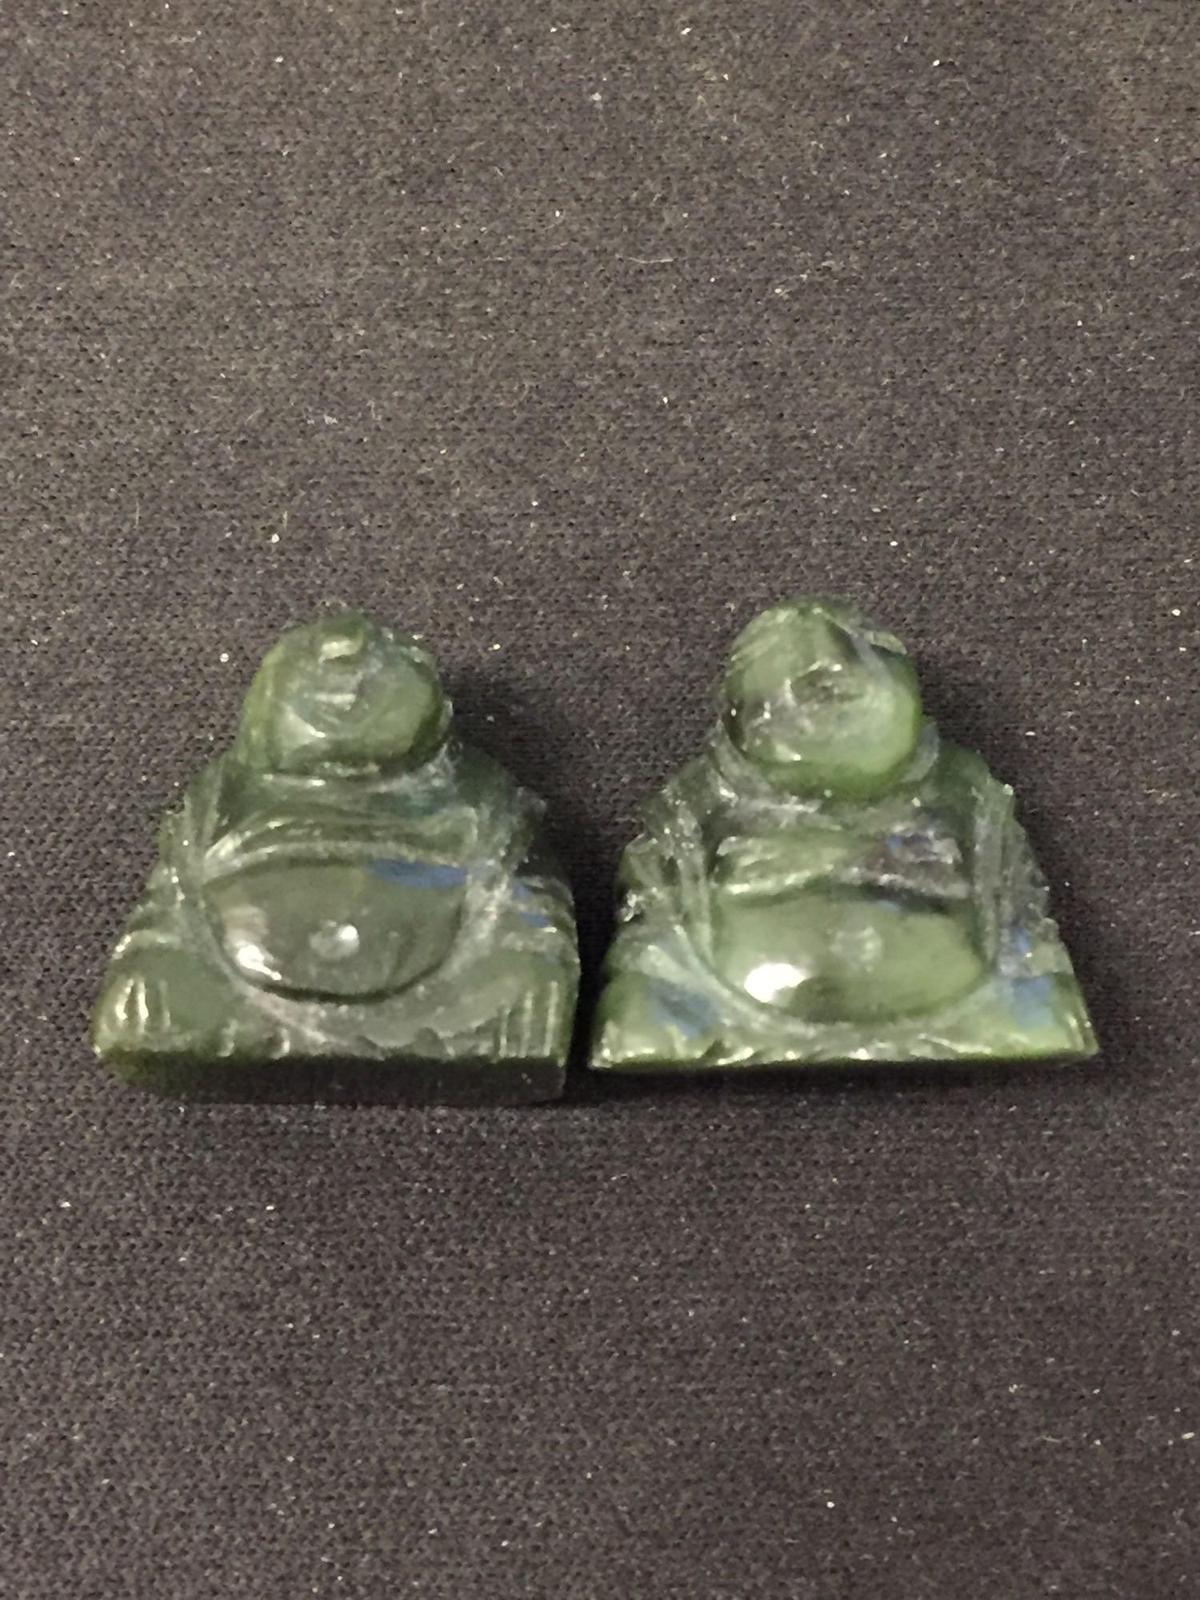 Lot of Two Asian Style Hand Carved 20mm Tall Green Jade Buddha Figurine - 83 Carats Total Weight